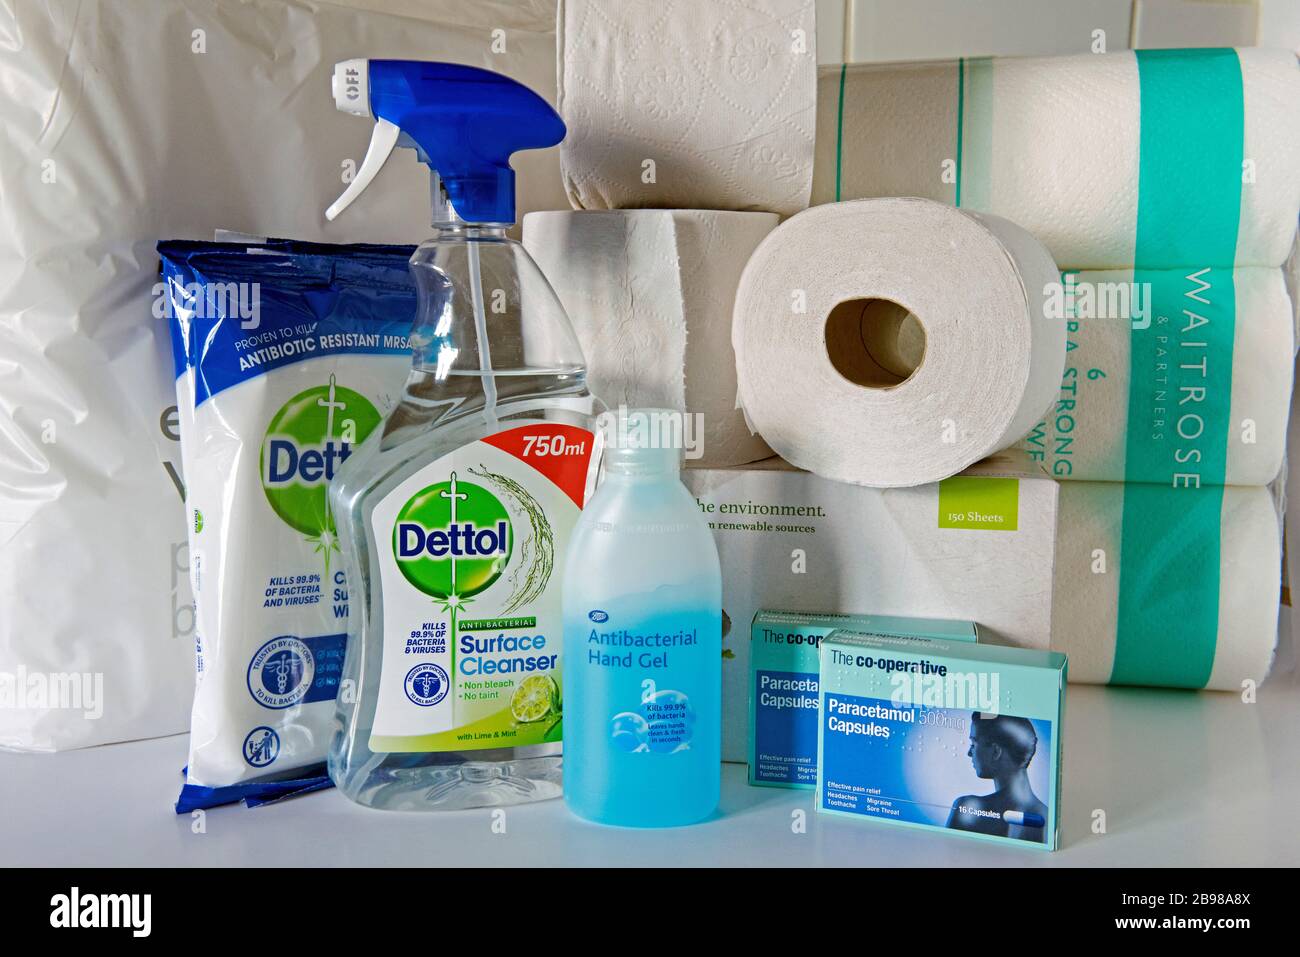 Antibacterial hand gel, Dettol spray and surface wipes to combat coronavirus. Toilet rolls behind and Paracetamol Capsules covid-19 epidemic pandemic Stock Photo